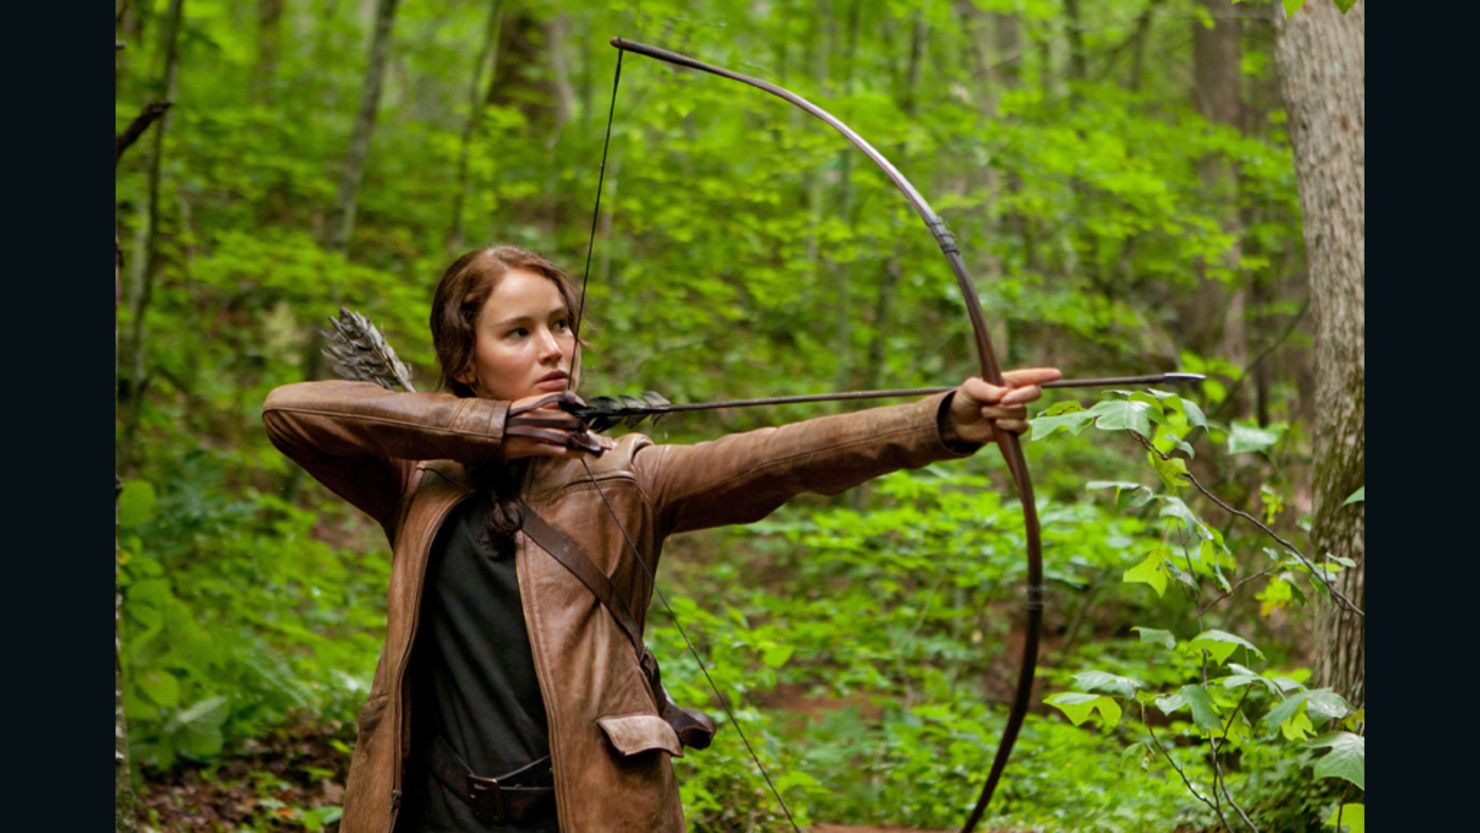 "The Hunger Games," starring Jennifer Lawrence, will be released on March 23.